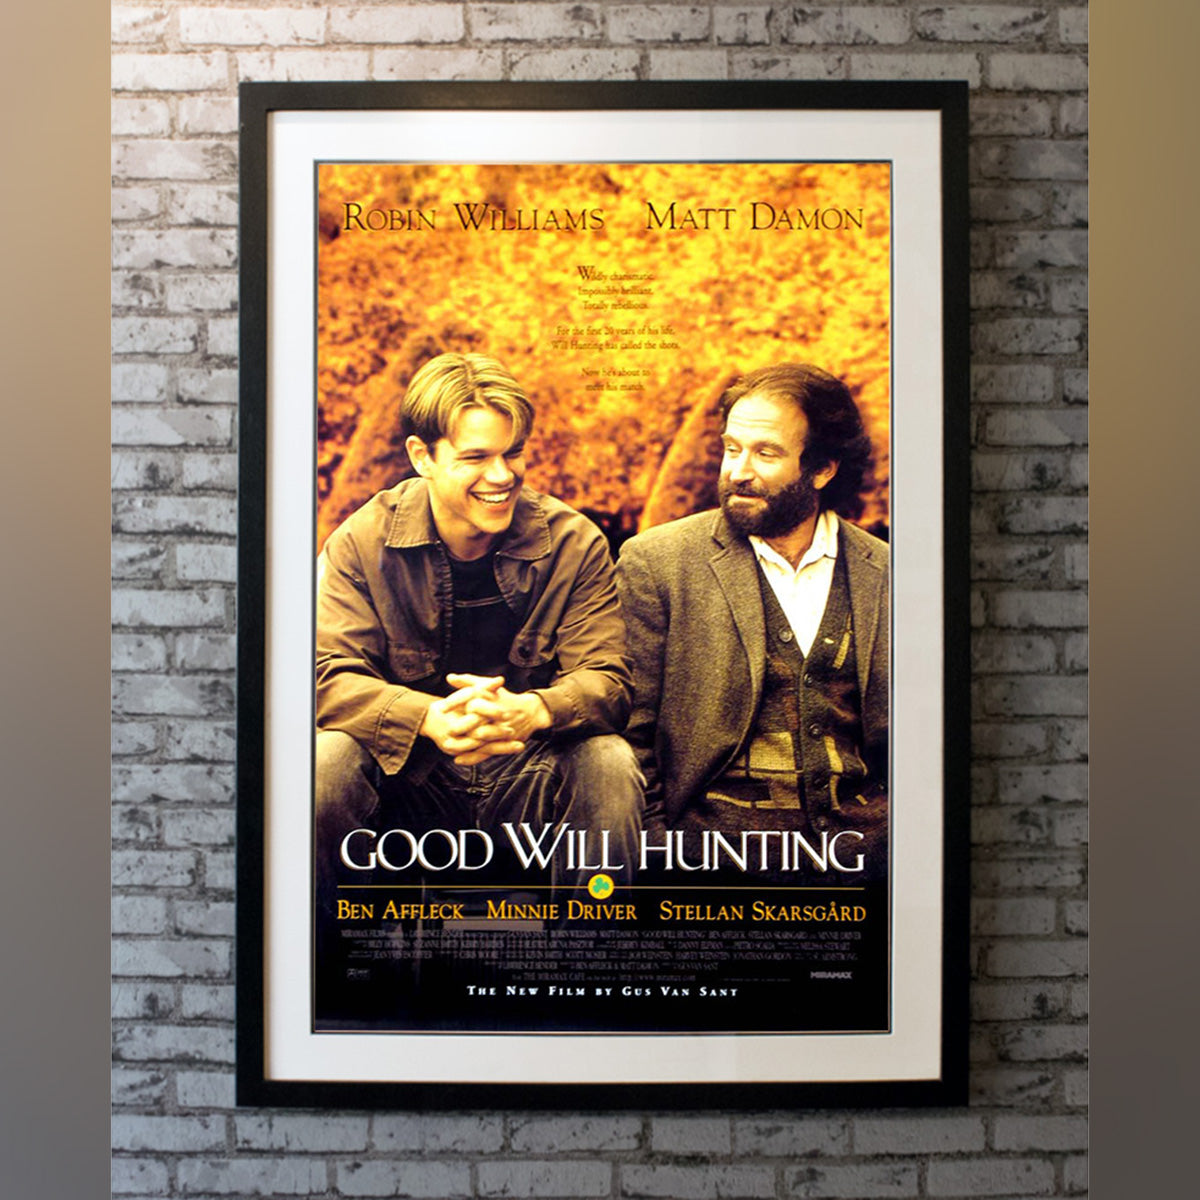 Original Movie Poster of Good Will Hunting (1997)